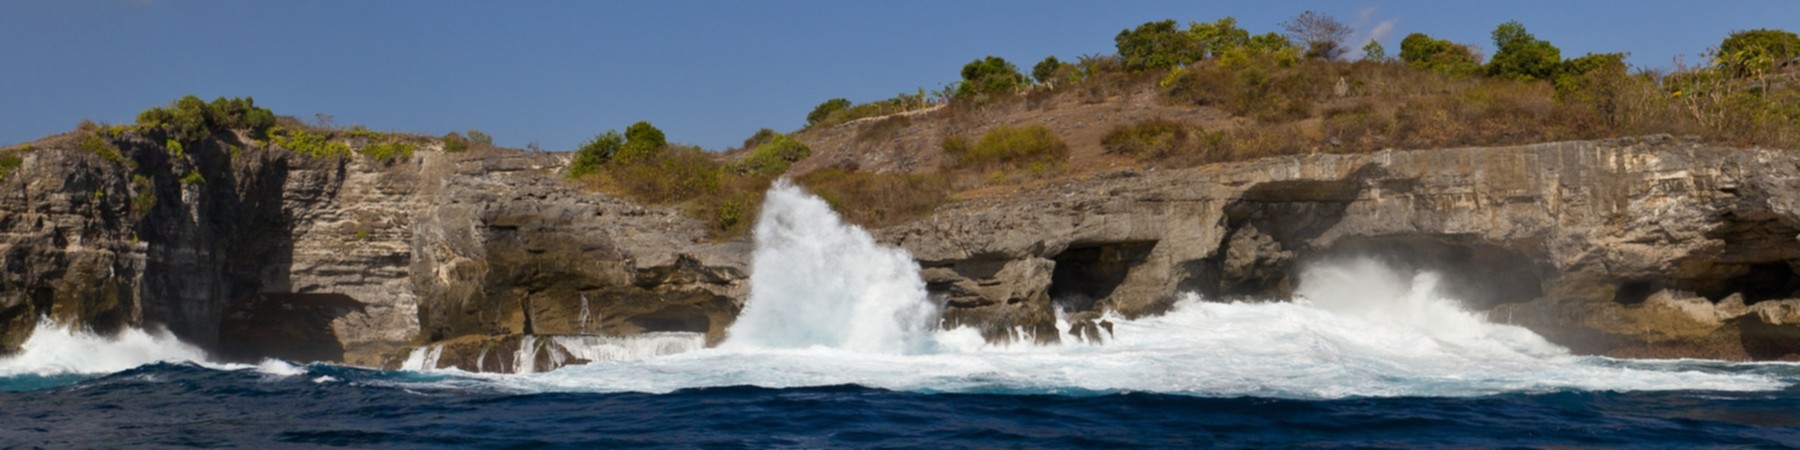 Nusa Lembongan Experiences with Bali Packages